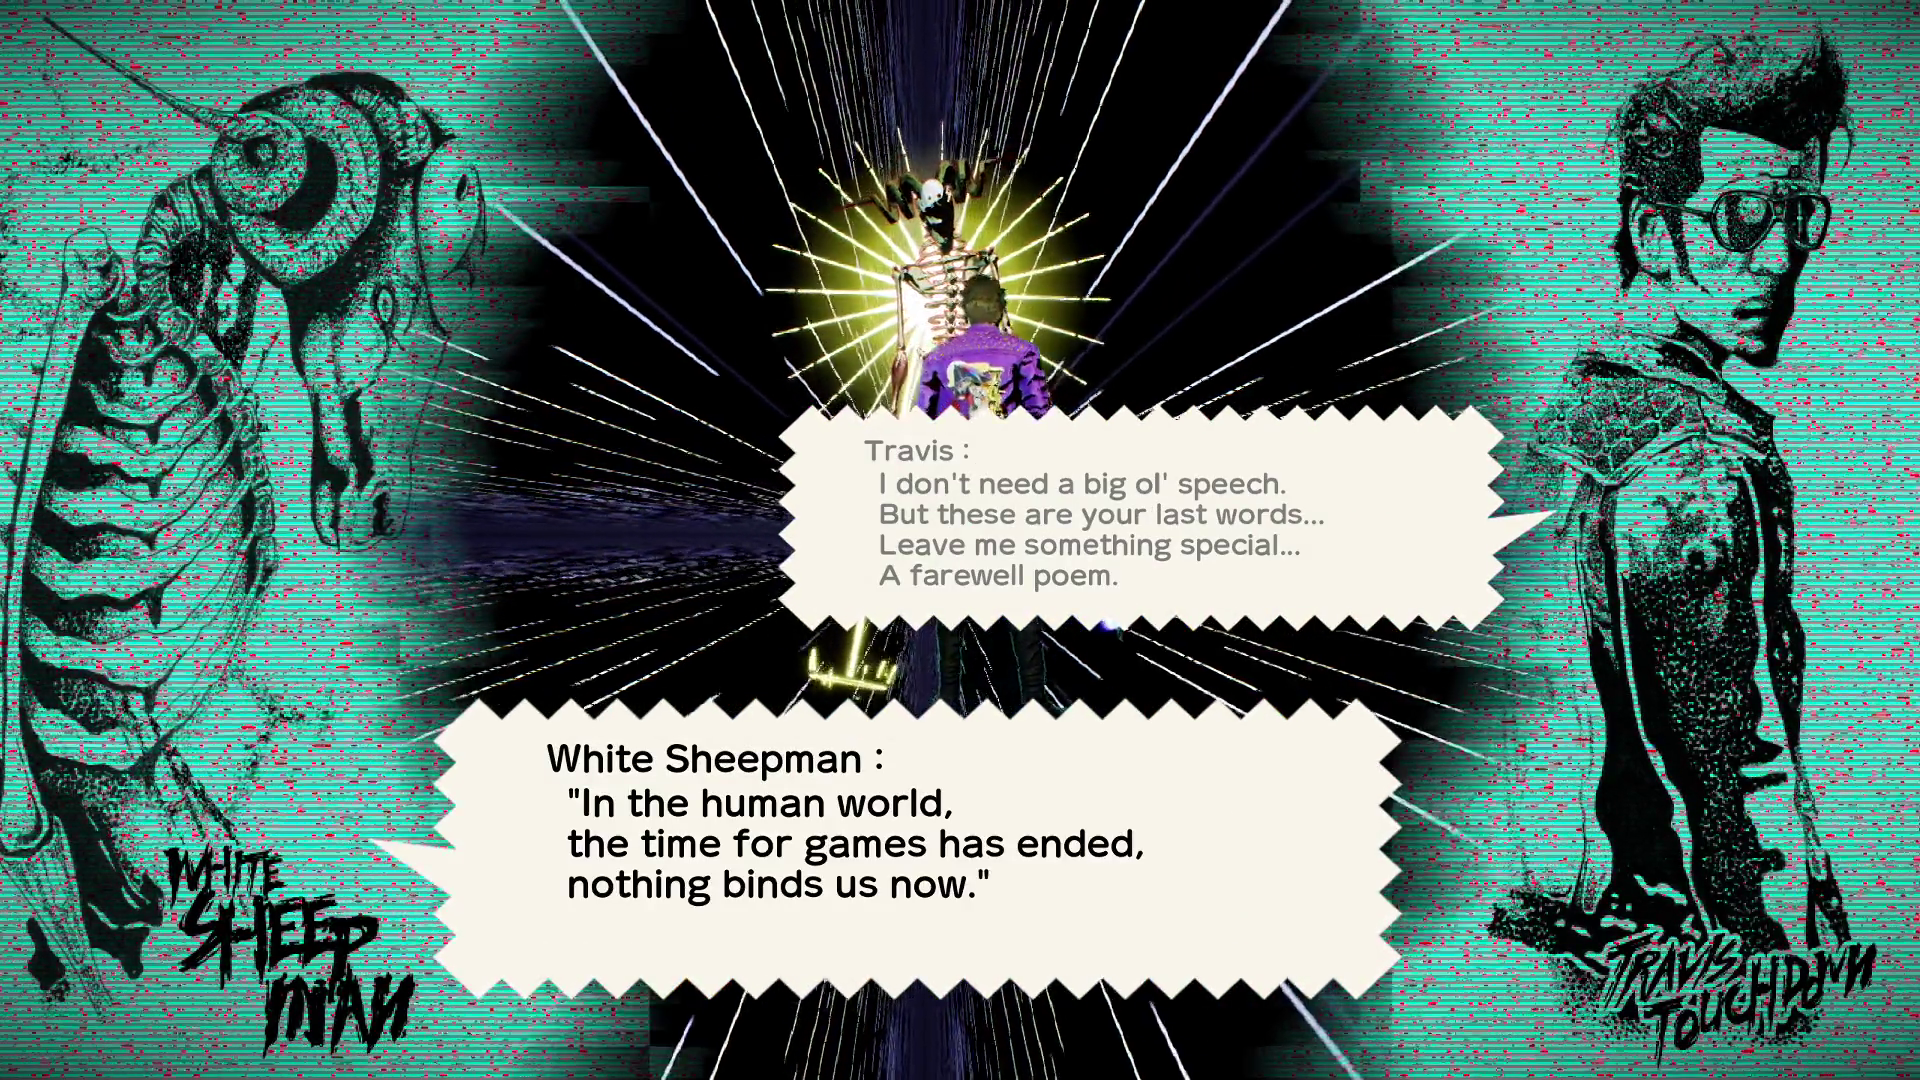 Dr. Juvenile, in the form of a semi-skeletal humanoid sheep, delivers a haiku to Travis Touchdown. Travis says, "I don't need a big ol' speech. But these are your last words... Leave me something special... A farewell poem." She responds, "In the human world, the time for games has ended, nothing binds us now."